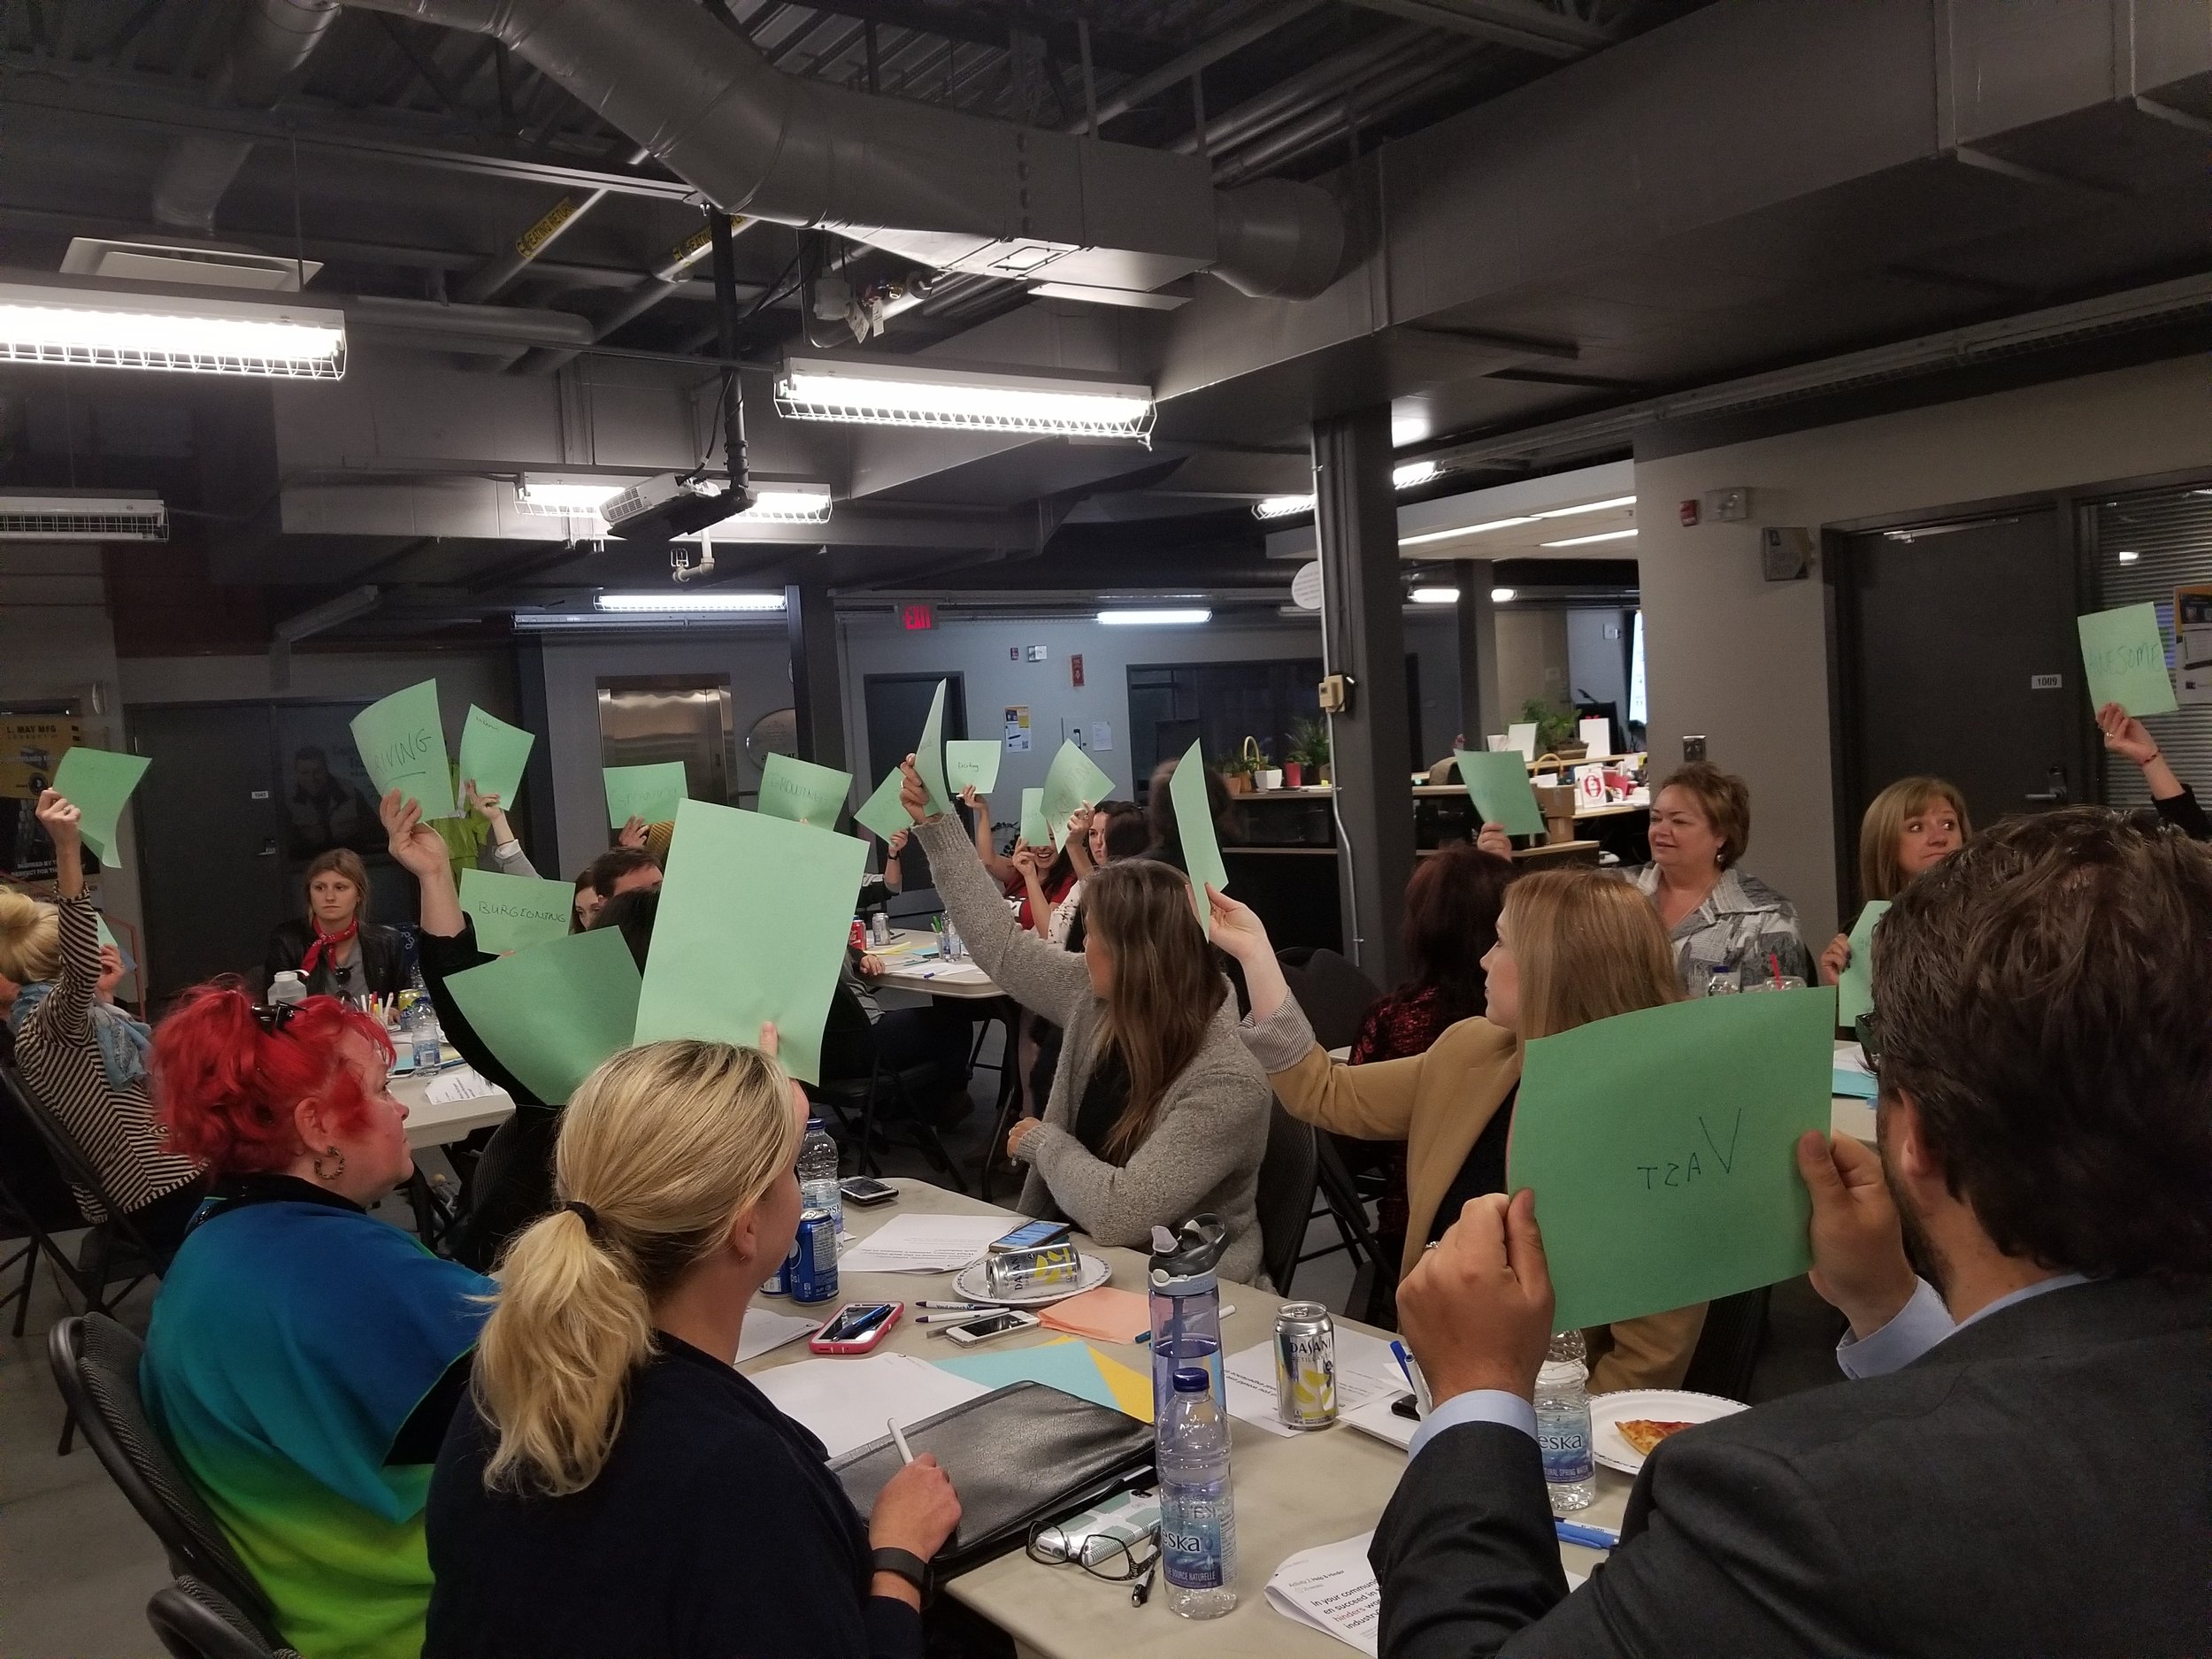  Image is of a group of people sitting down at the Community Conversation in Sudbury, Ontario. The audience is holding up green sheets of paper with ideas written on them.  